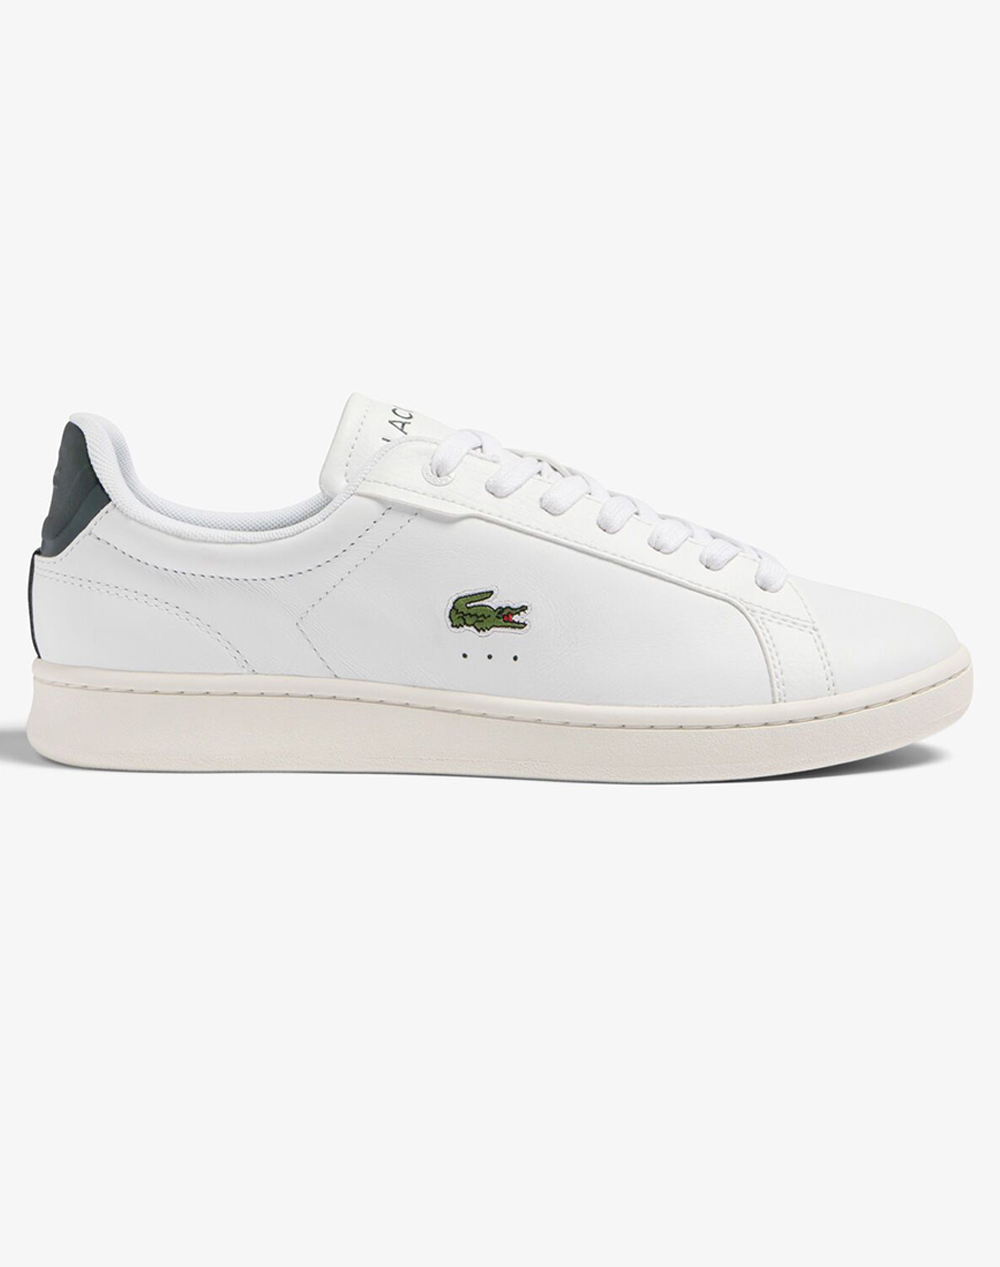 LACOSTE MENS CARNABY PRO 123 2 SMA SHOES